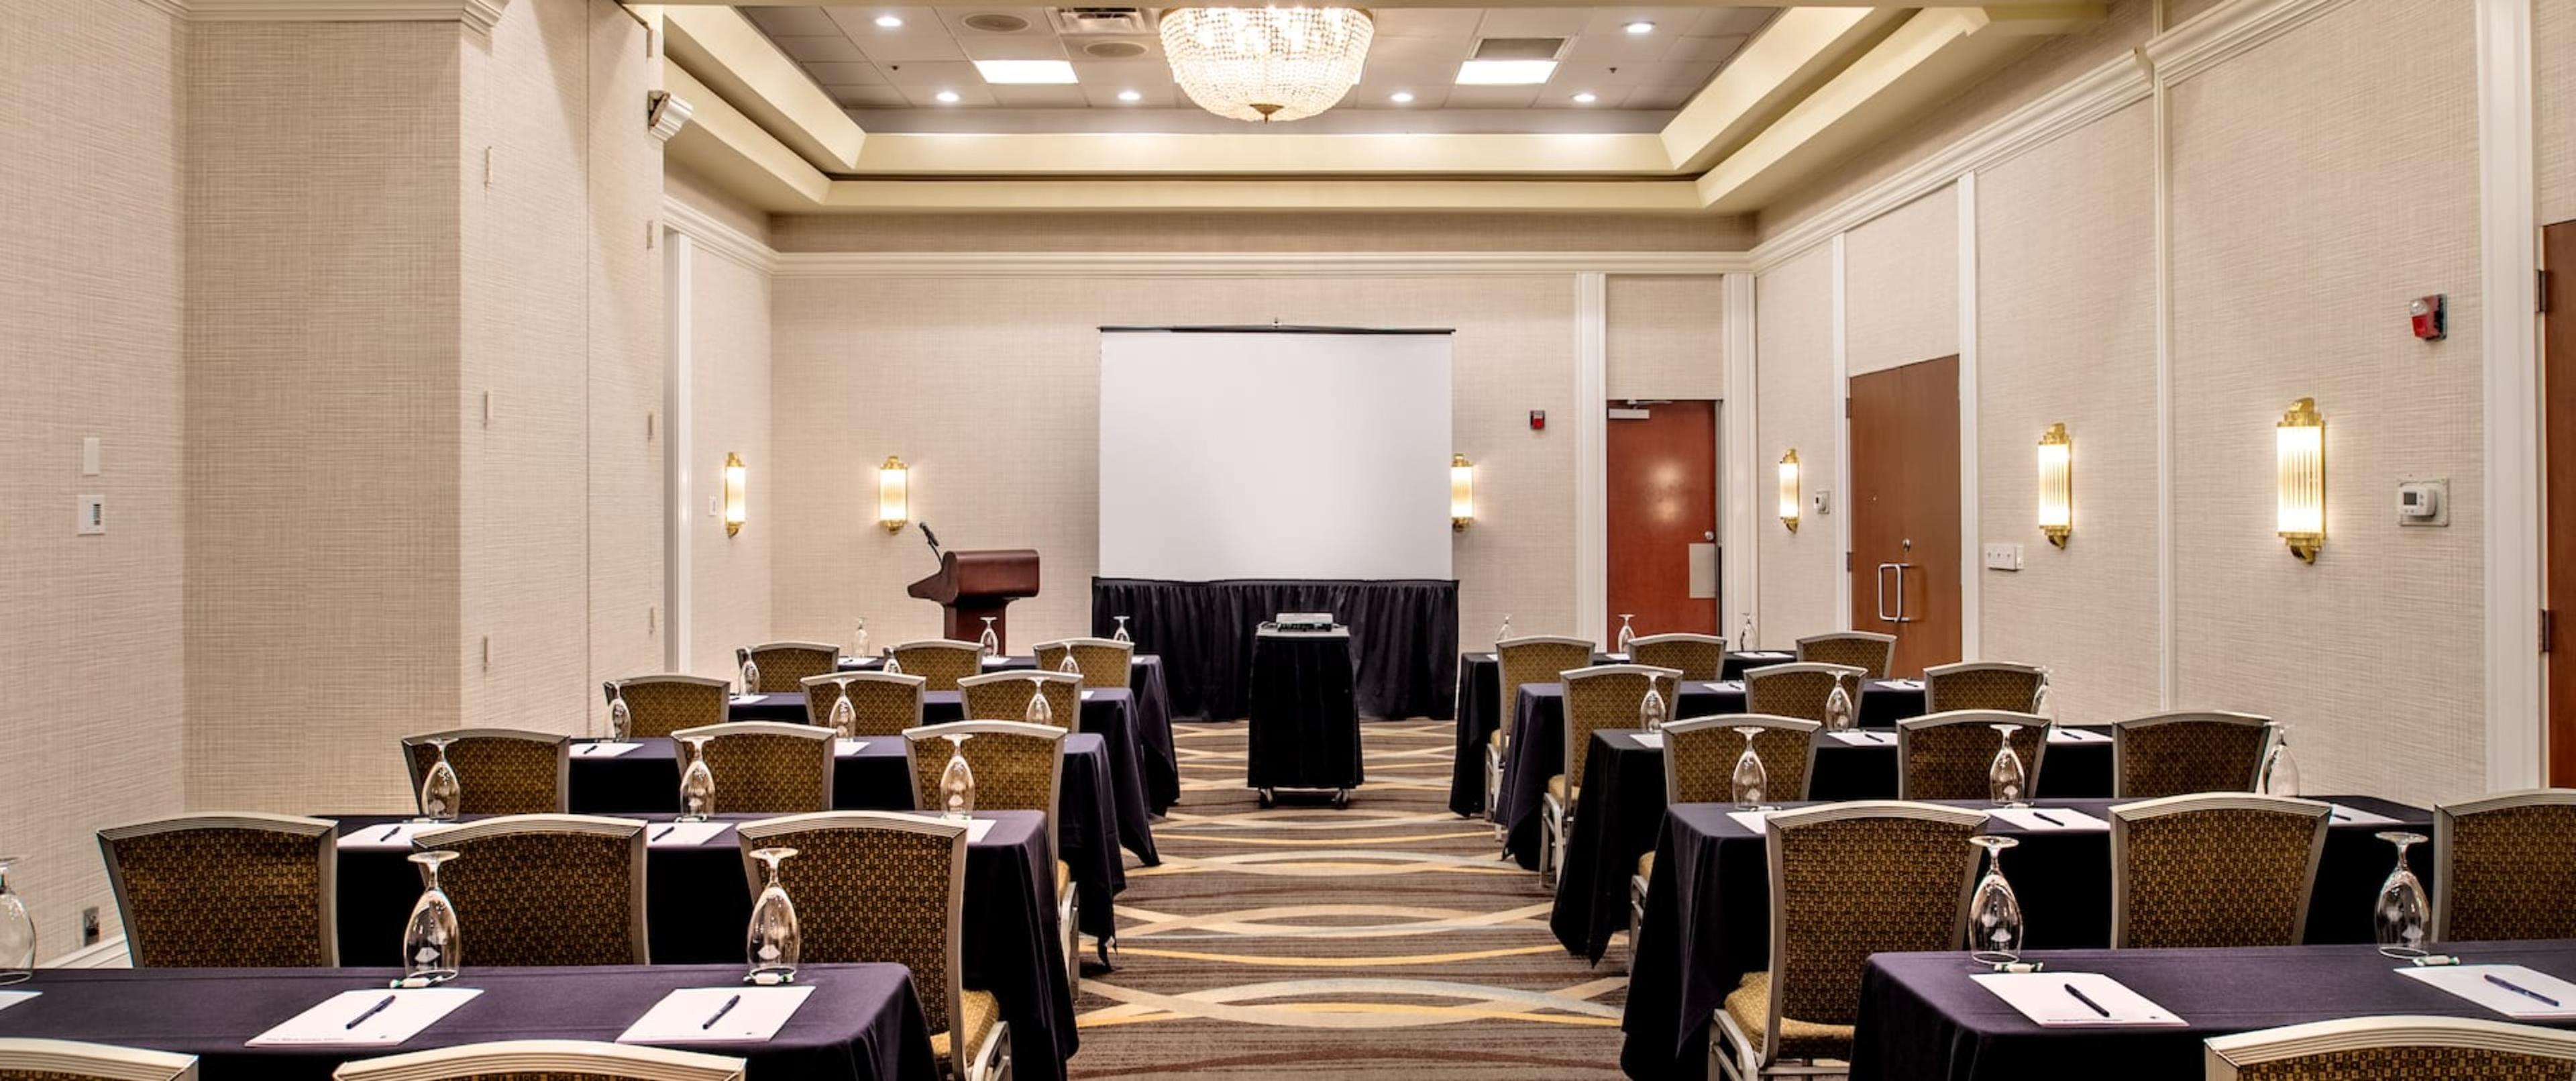 DoubleTree by Hilton Hotel Collinsville - St. Louis